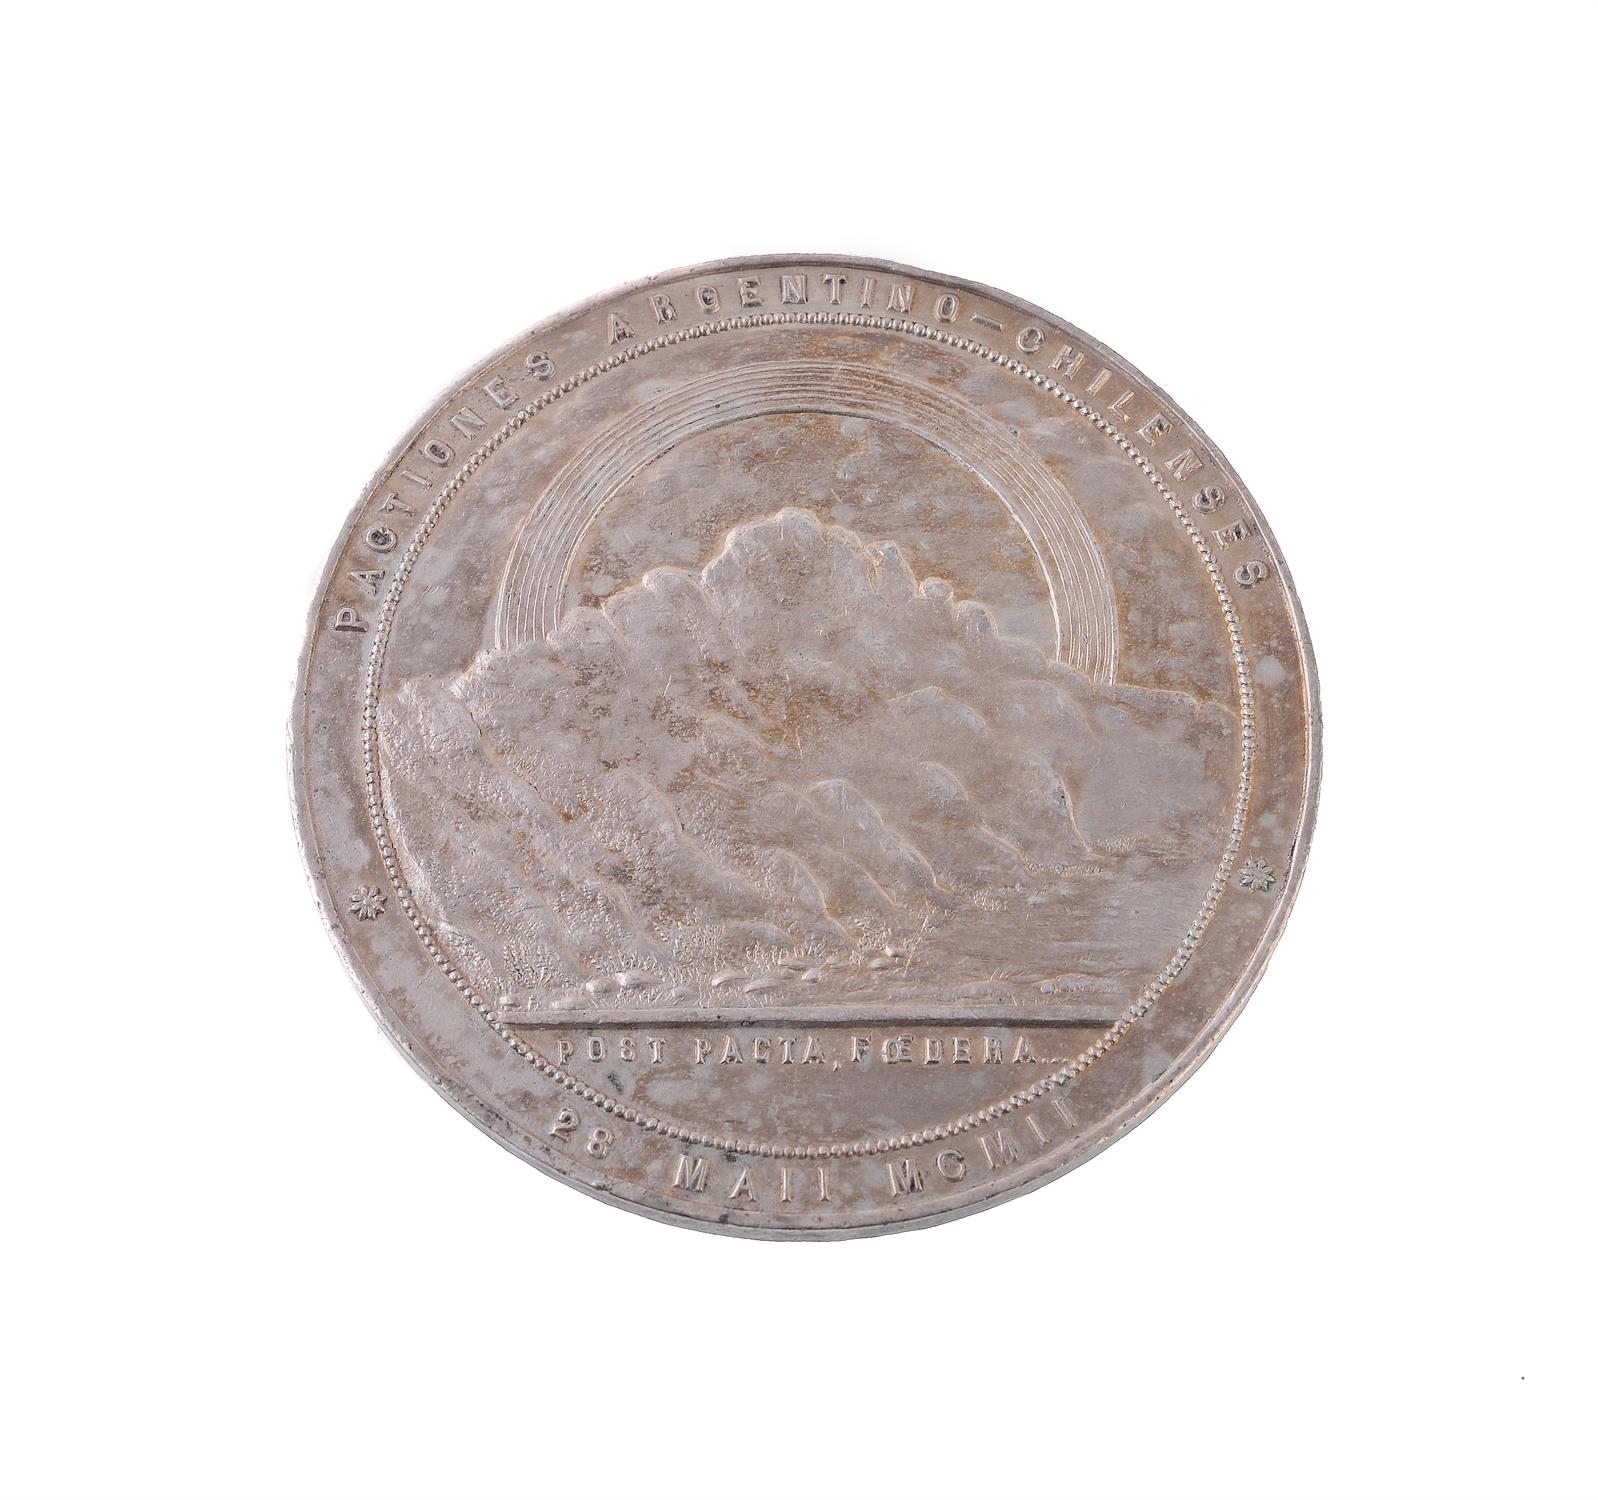 Argentina, Pact with Chile 1902, silver bronze medal - Image 2 of 2